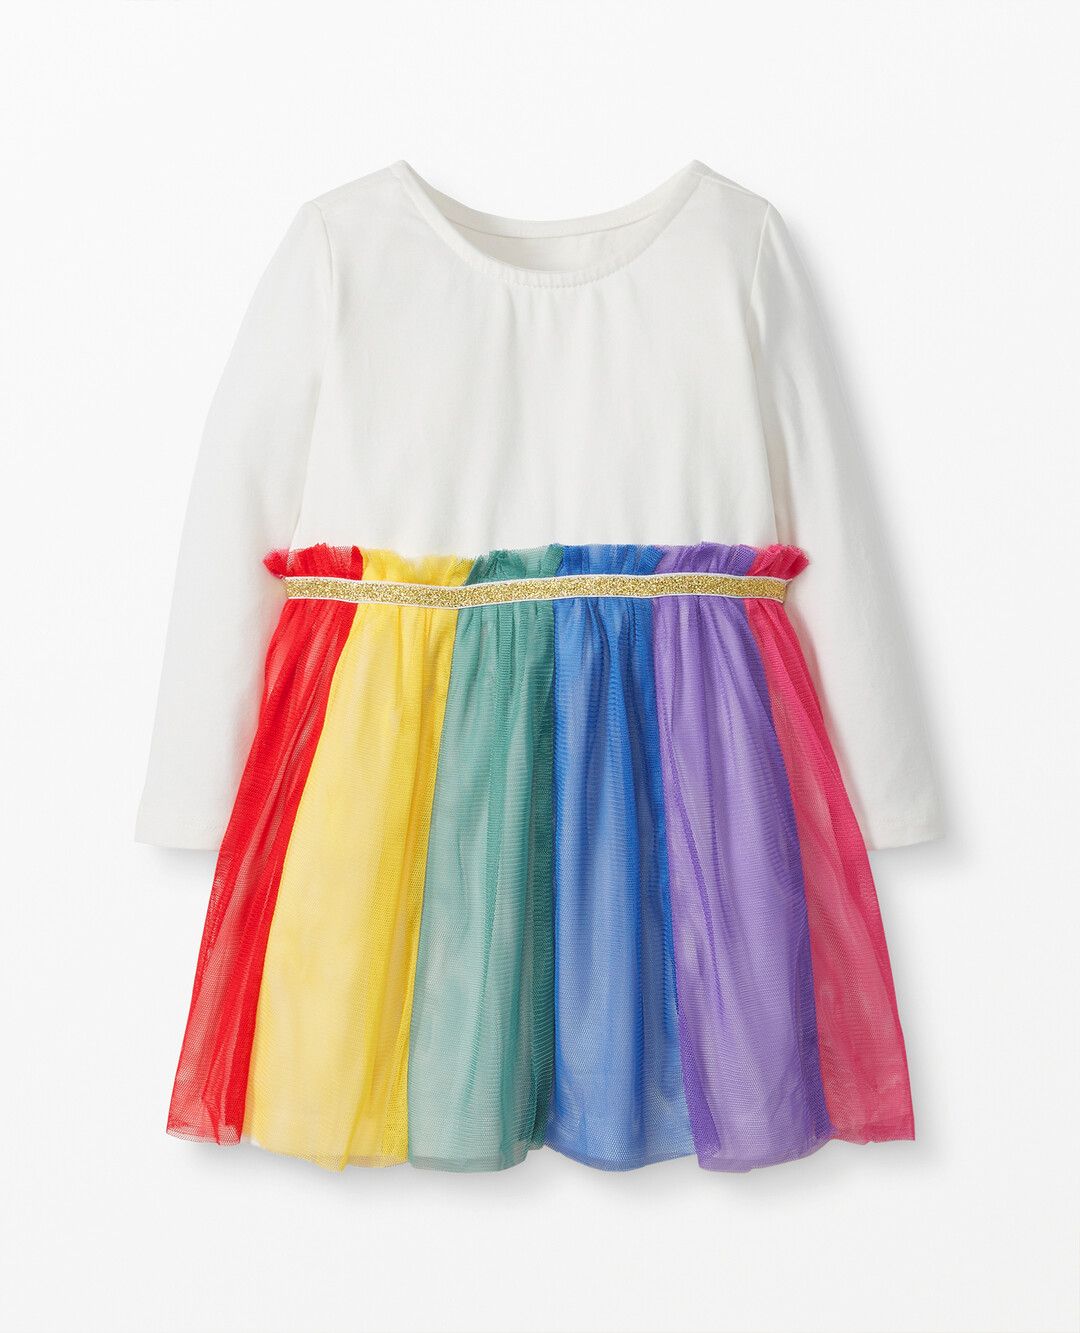 Rainbow Dress In Soft Tulle | Hanna Andersson